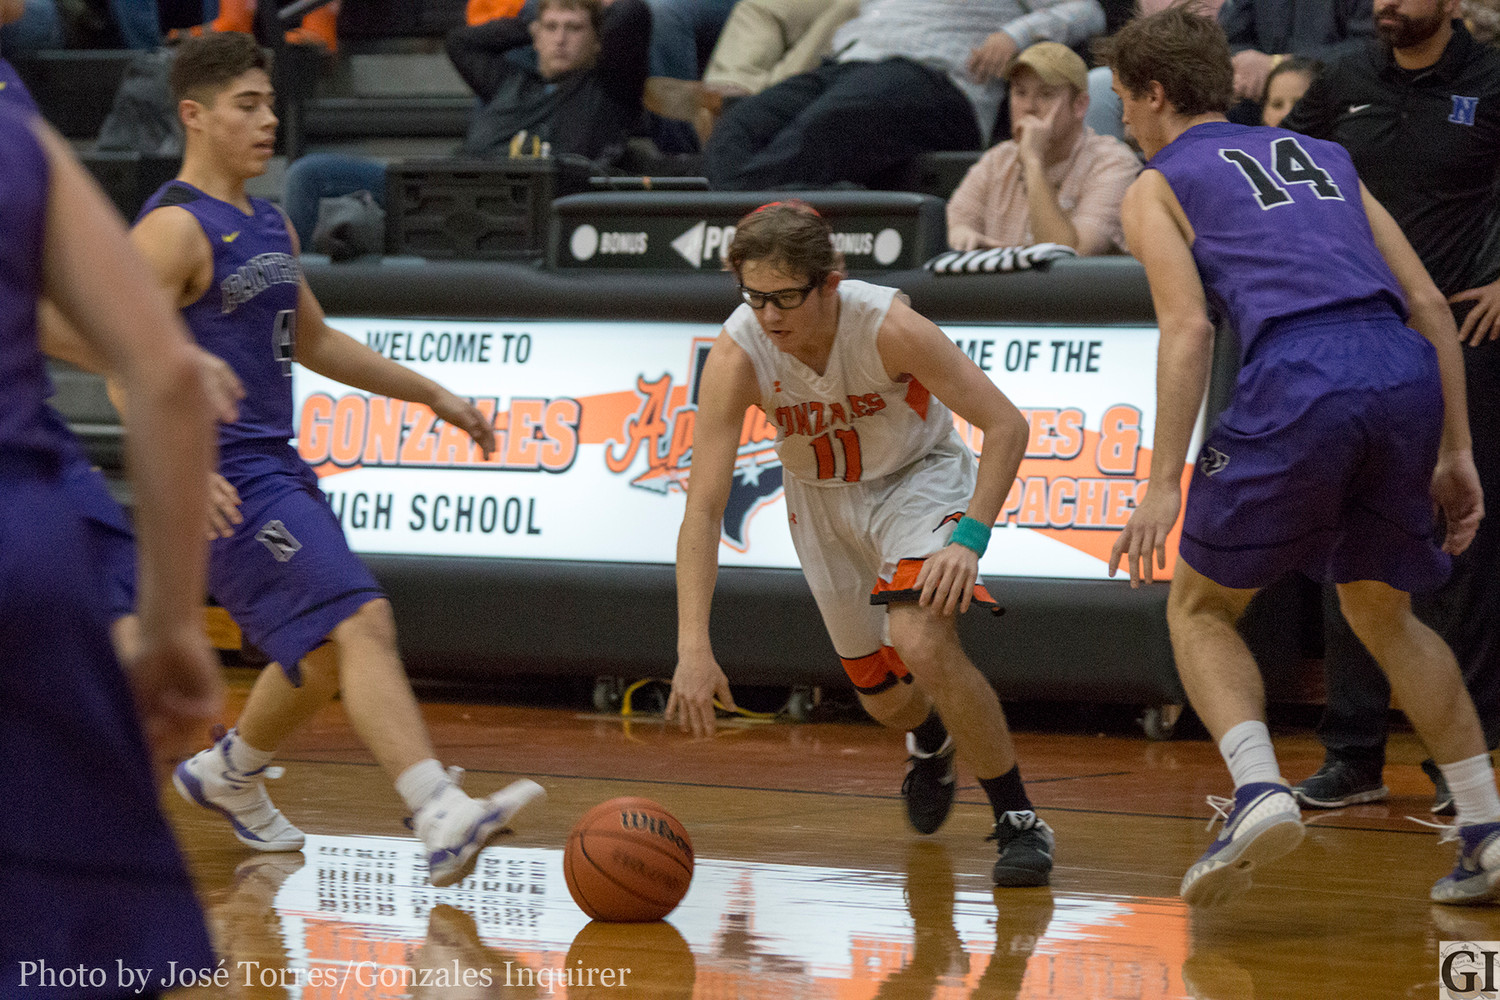 Mason Richter (11) dribbles through defenders in Gonzales’ 66-50 loss to Navarro last Friday. Richter ended the night with a team-leading 12 points.